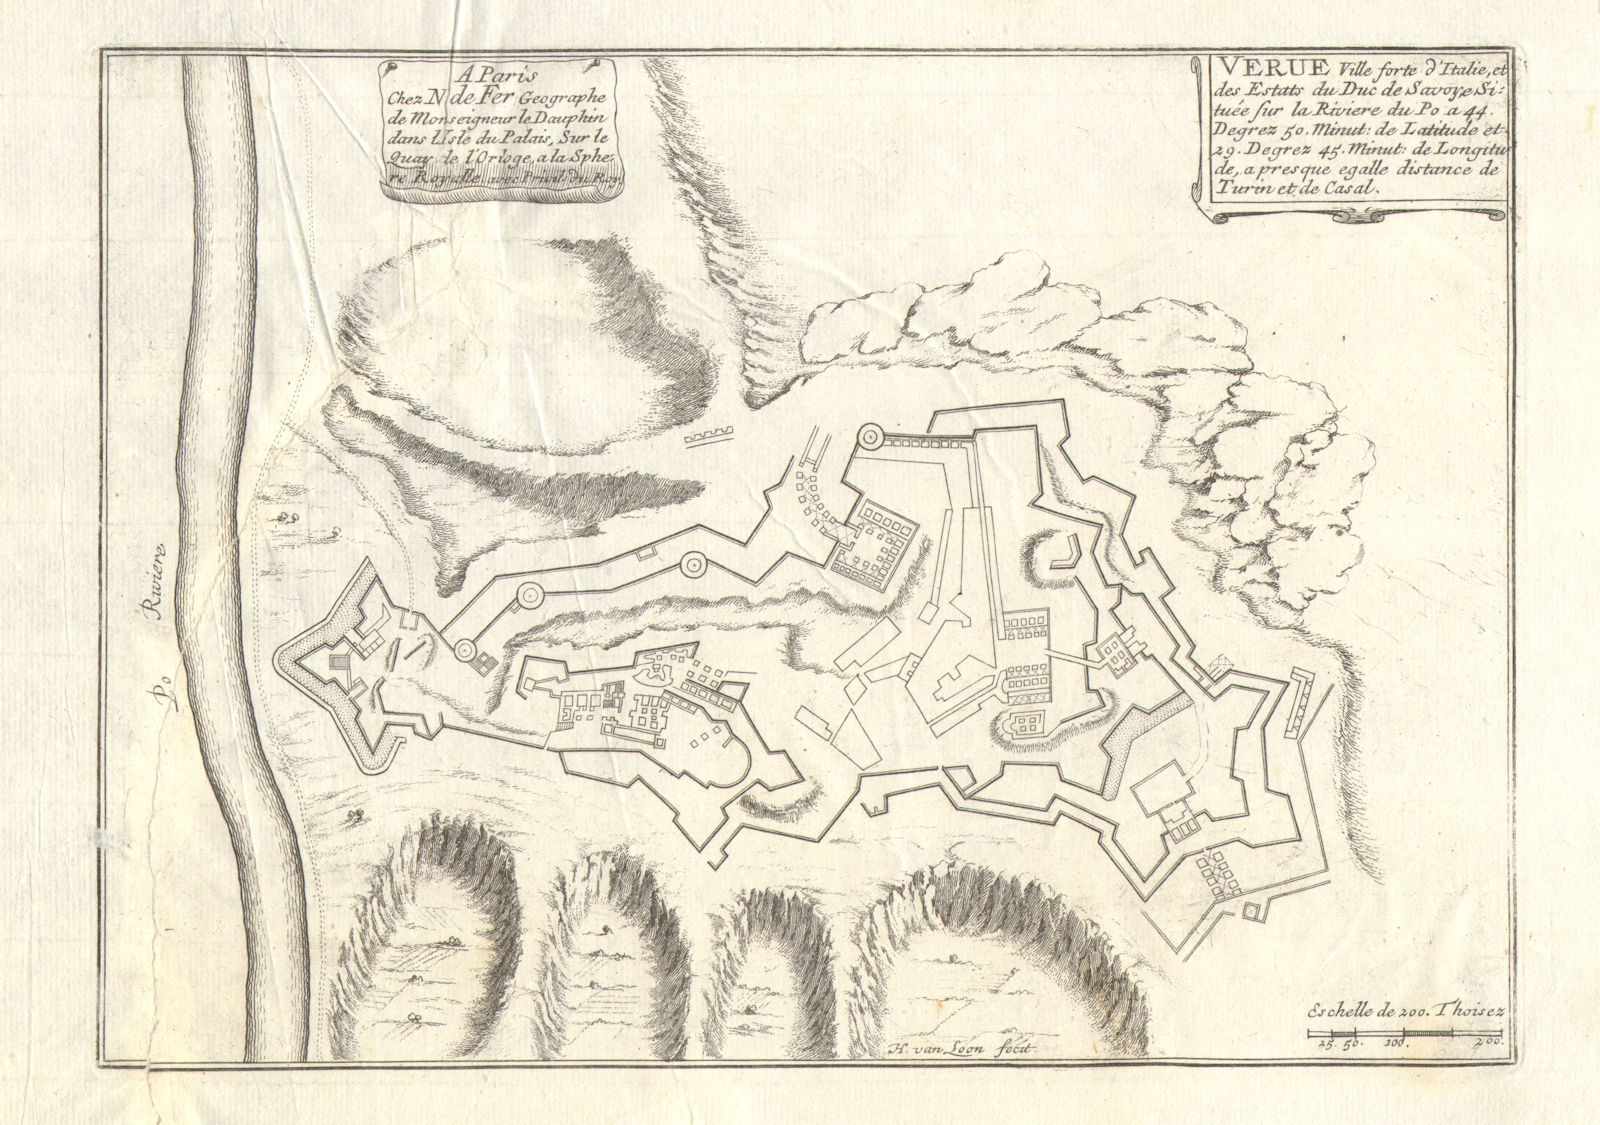 Associate Product 'Verue'. Verrua Savoia. Fortifed town/city plan. Italy. DE FER 1705 old map